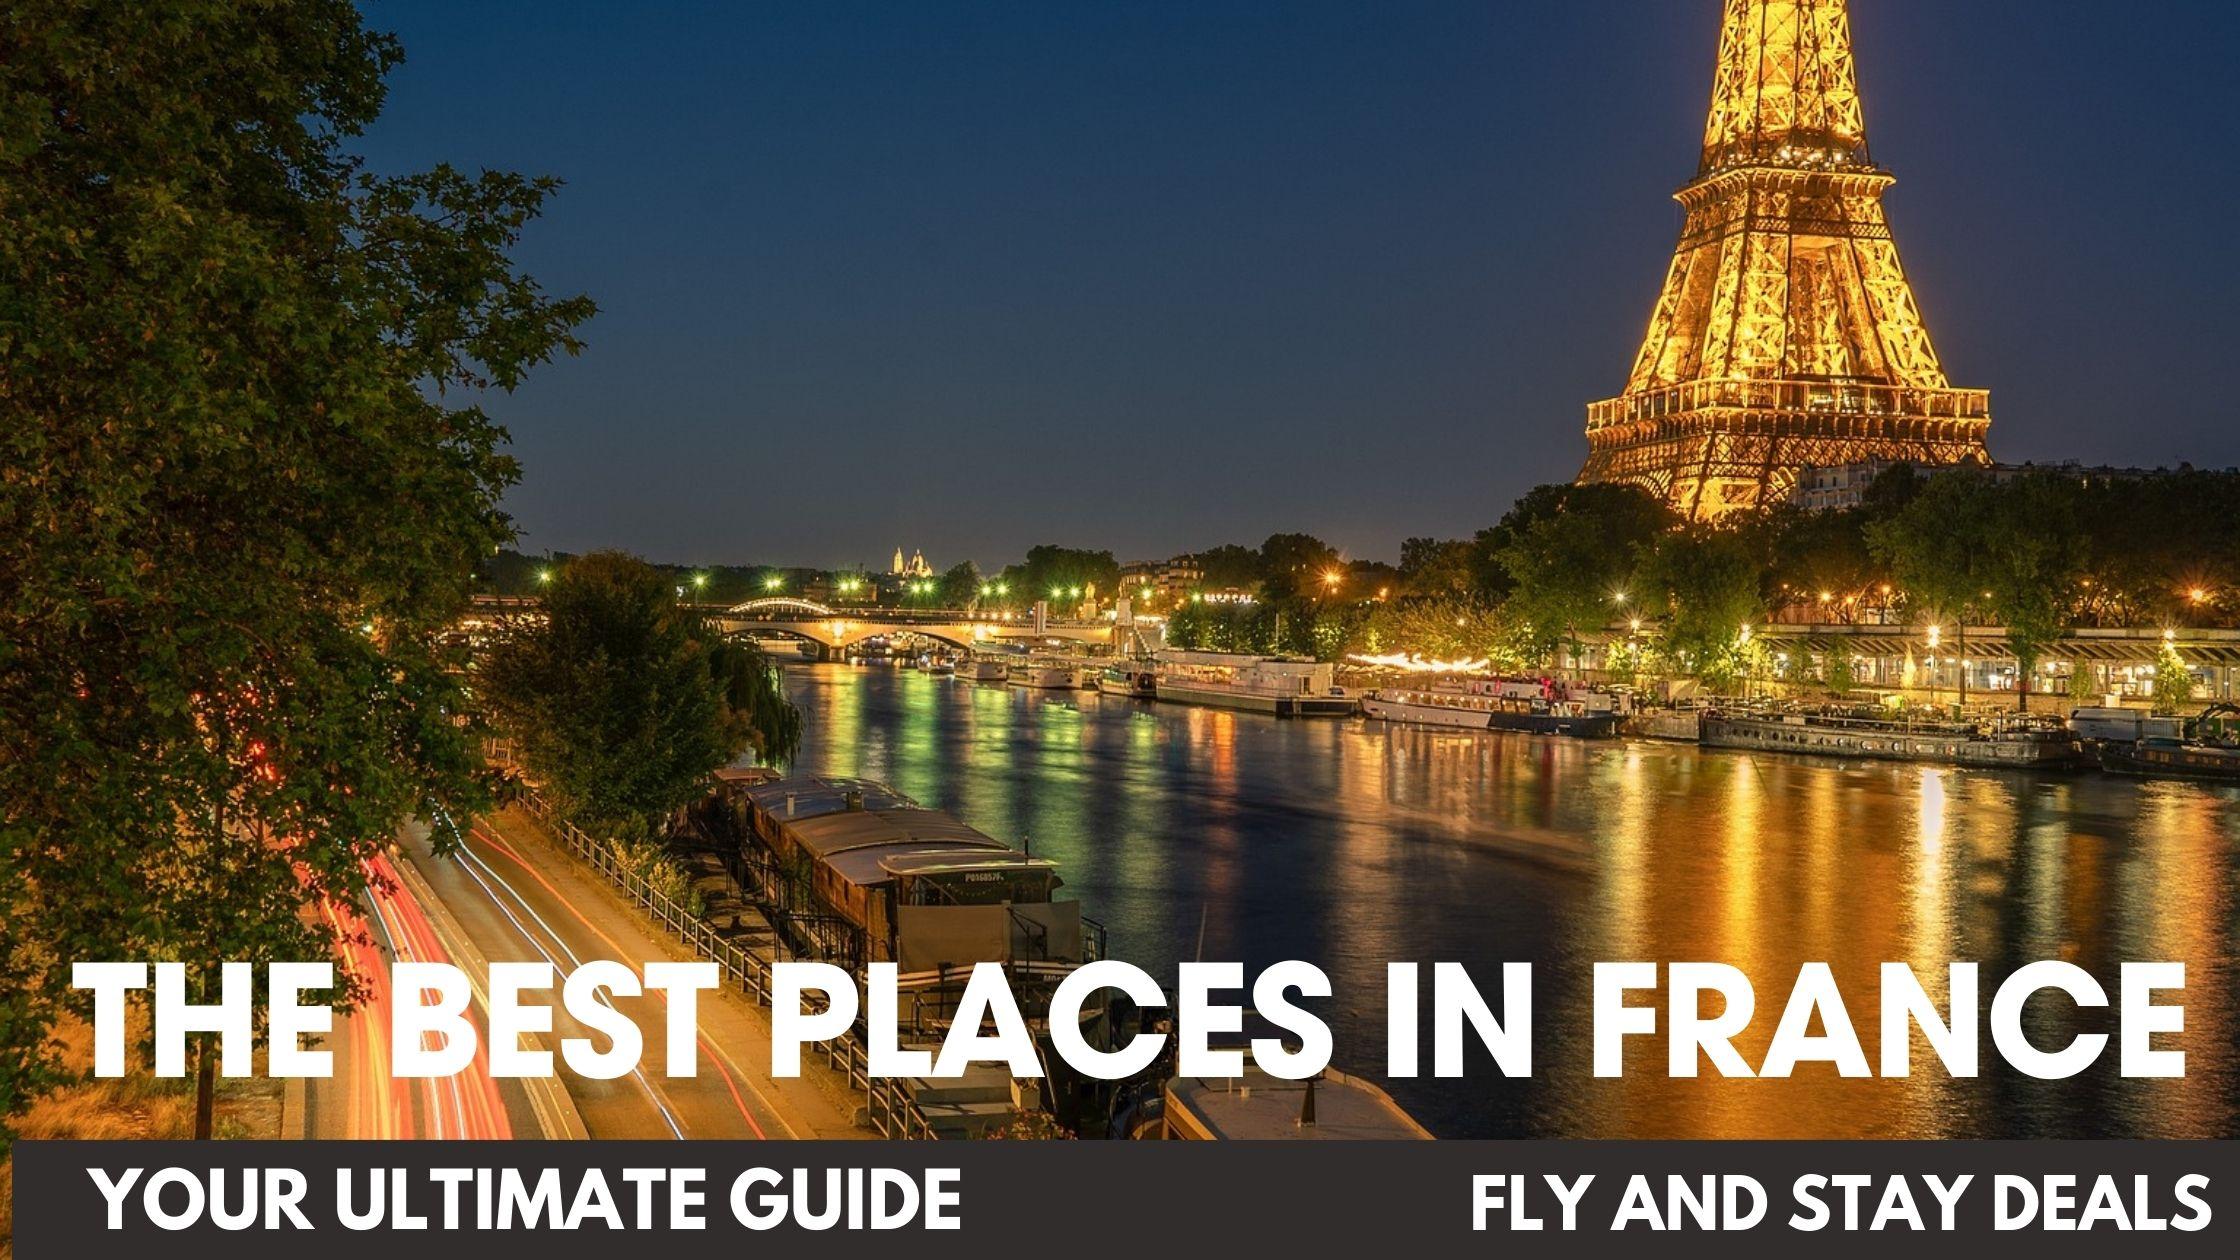 Your Ultimate Guide to Explore the Best Places in France